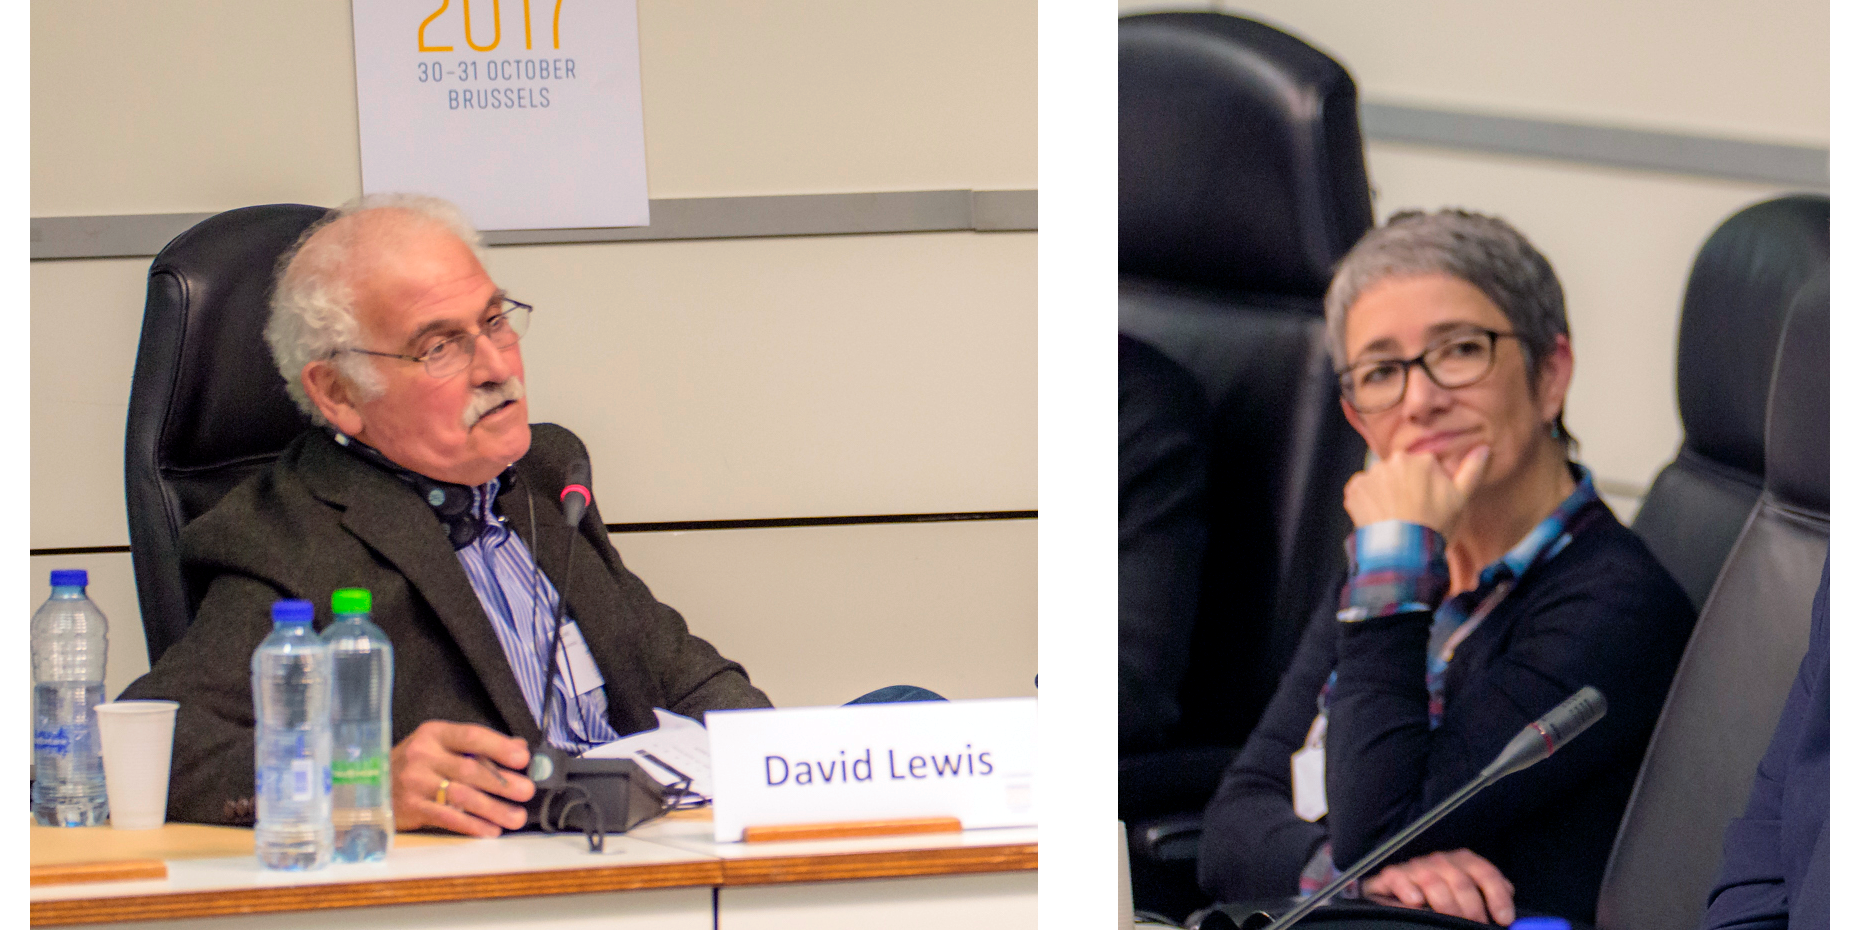 Authors of the Eurocadres report David Lewis and Anna Myers in the whistleblower protection panel at Eurocadres' Congress 2017.